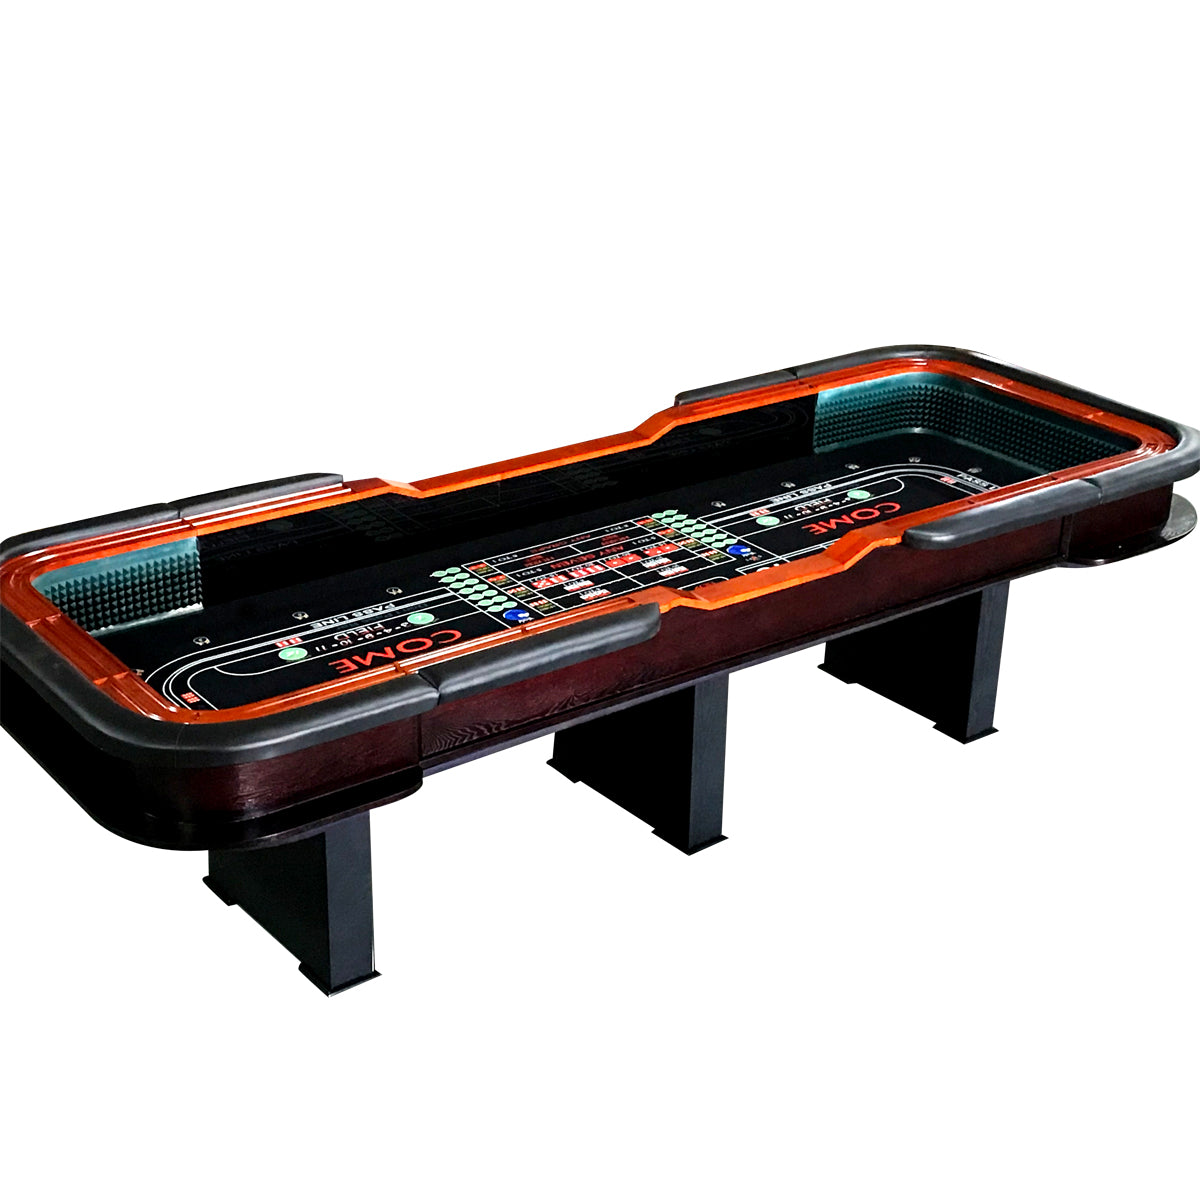 12 Foot Deluxe Craps Dice Table with Diamond Rubber